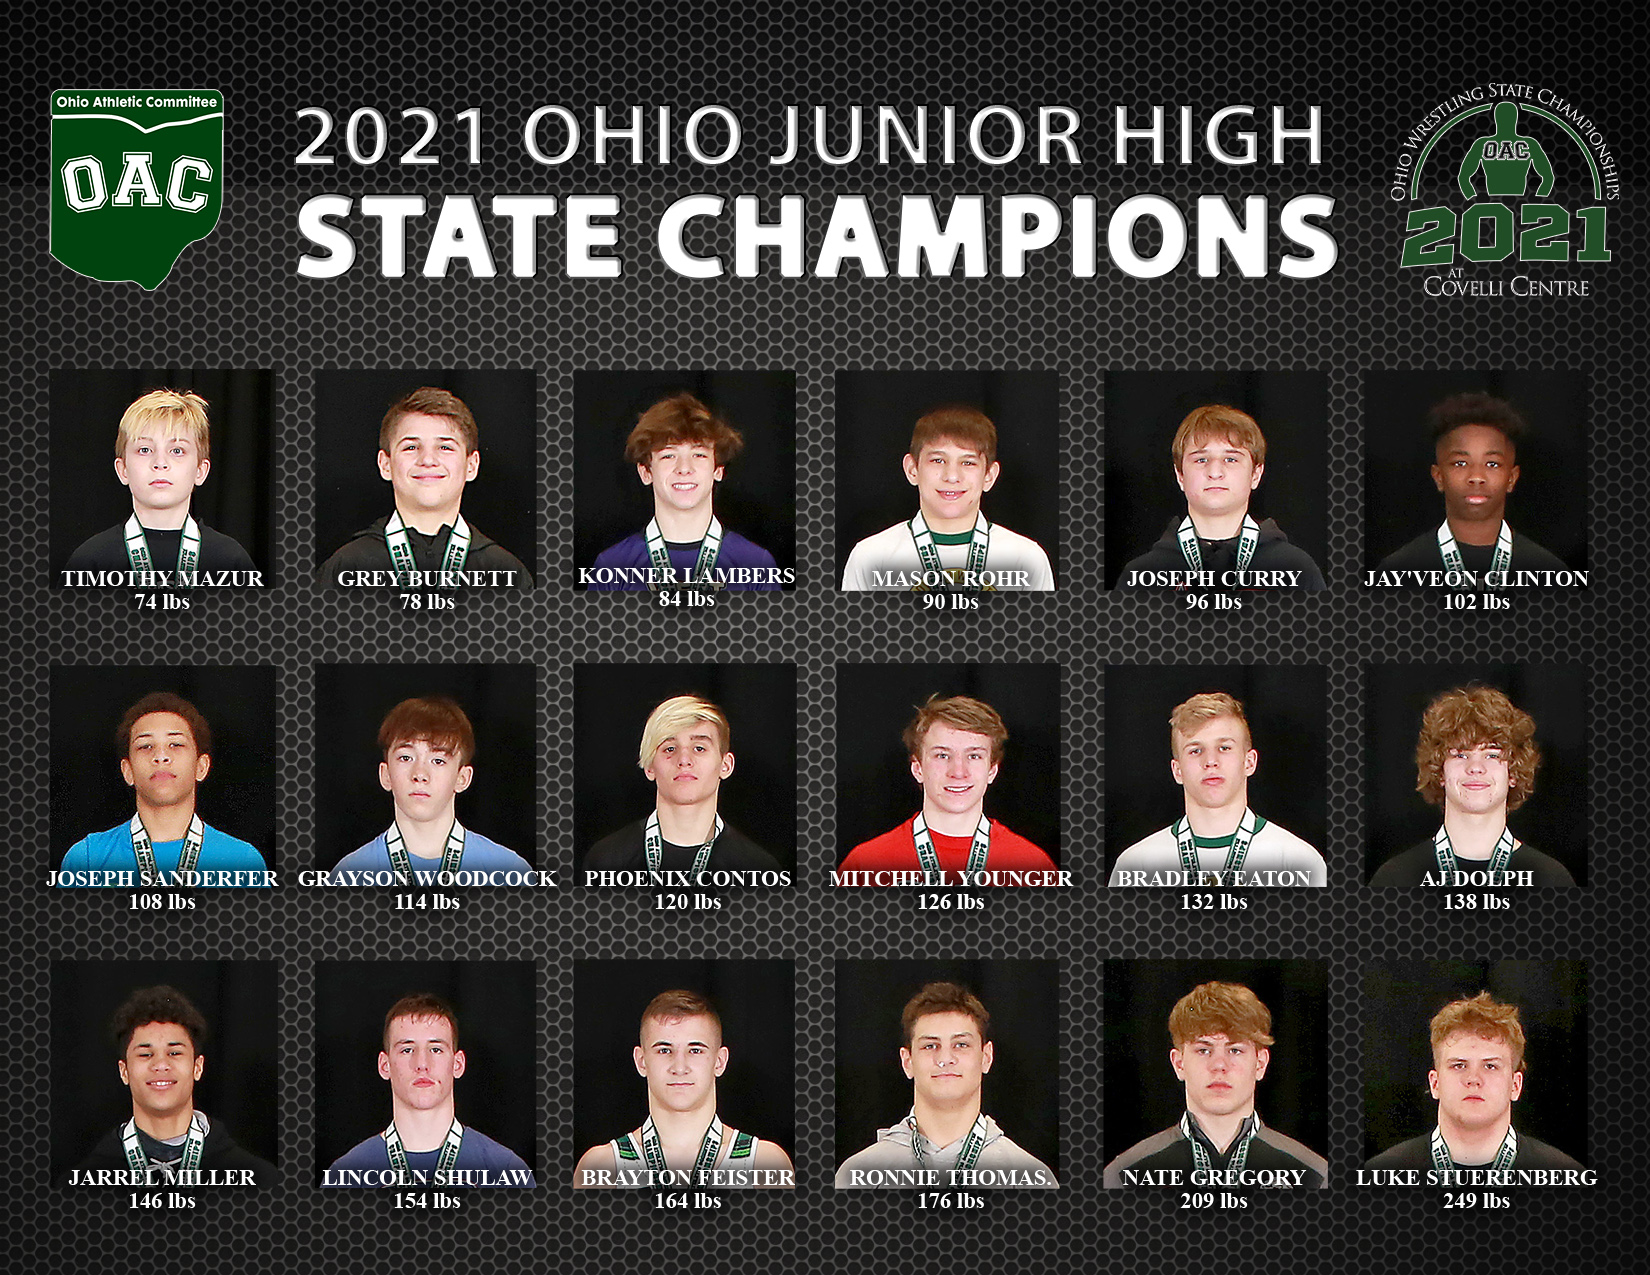 2021 Ohio Junior High State Champs OHIO ATHLETIC COMMITTEE